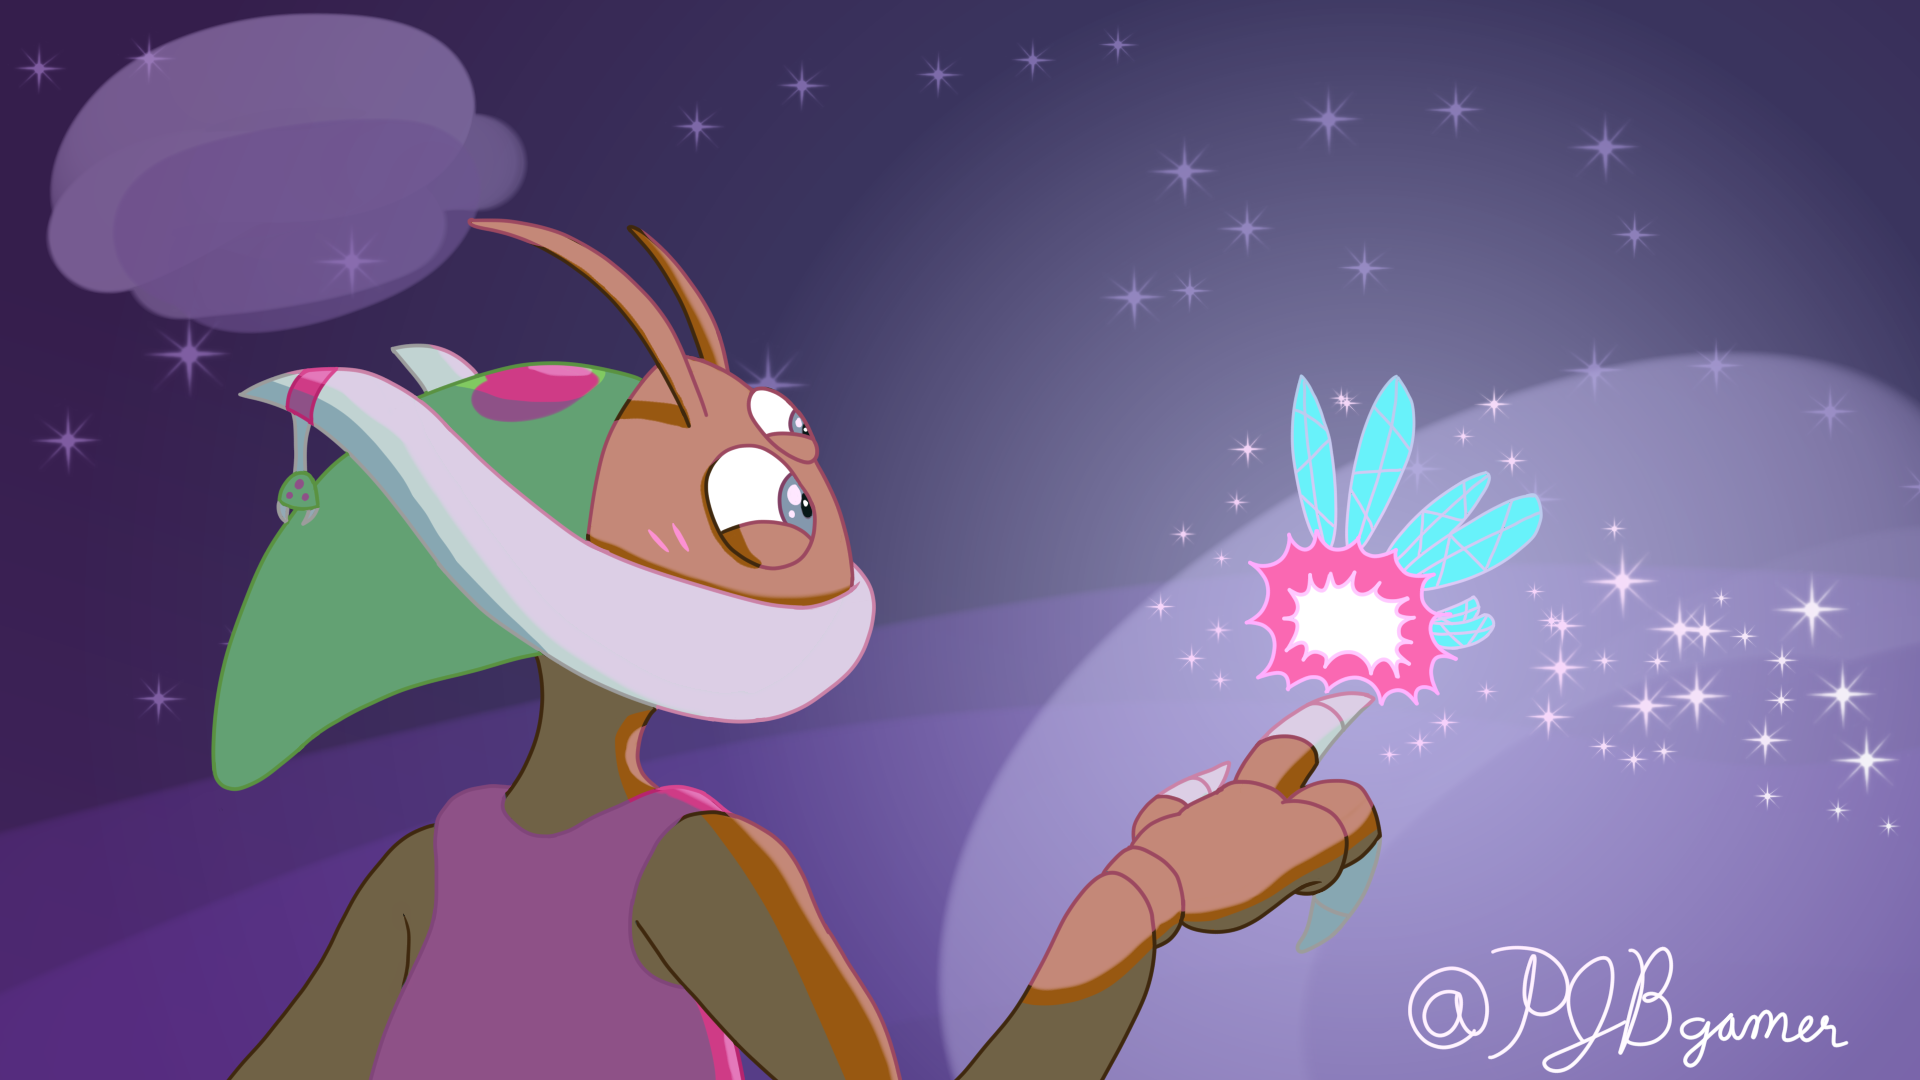 A futuristic Kabutroid with antennae, a horn that curves around her face, with a Metroid earring dangling from one side, wearing a pink top, holding her hand out to a six-winged fairy Abby, a glowing pink ball with wings and giving off sparkles, who is shining a light over Kabutroid, with a purple starry night in the background.